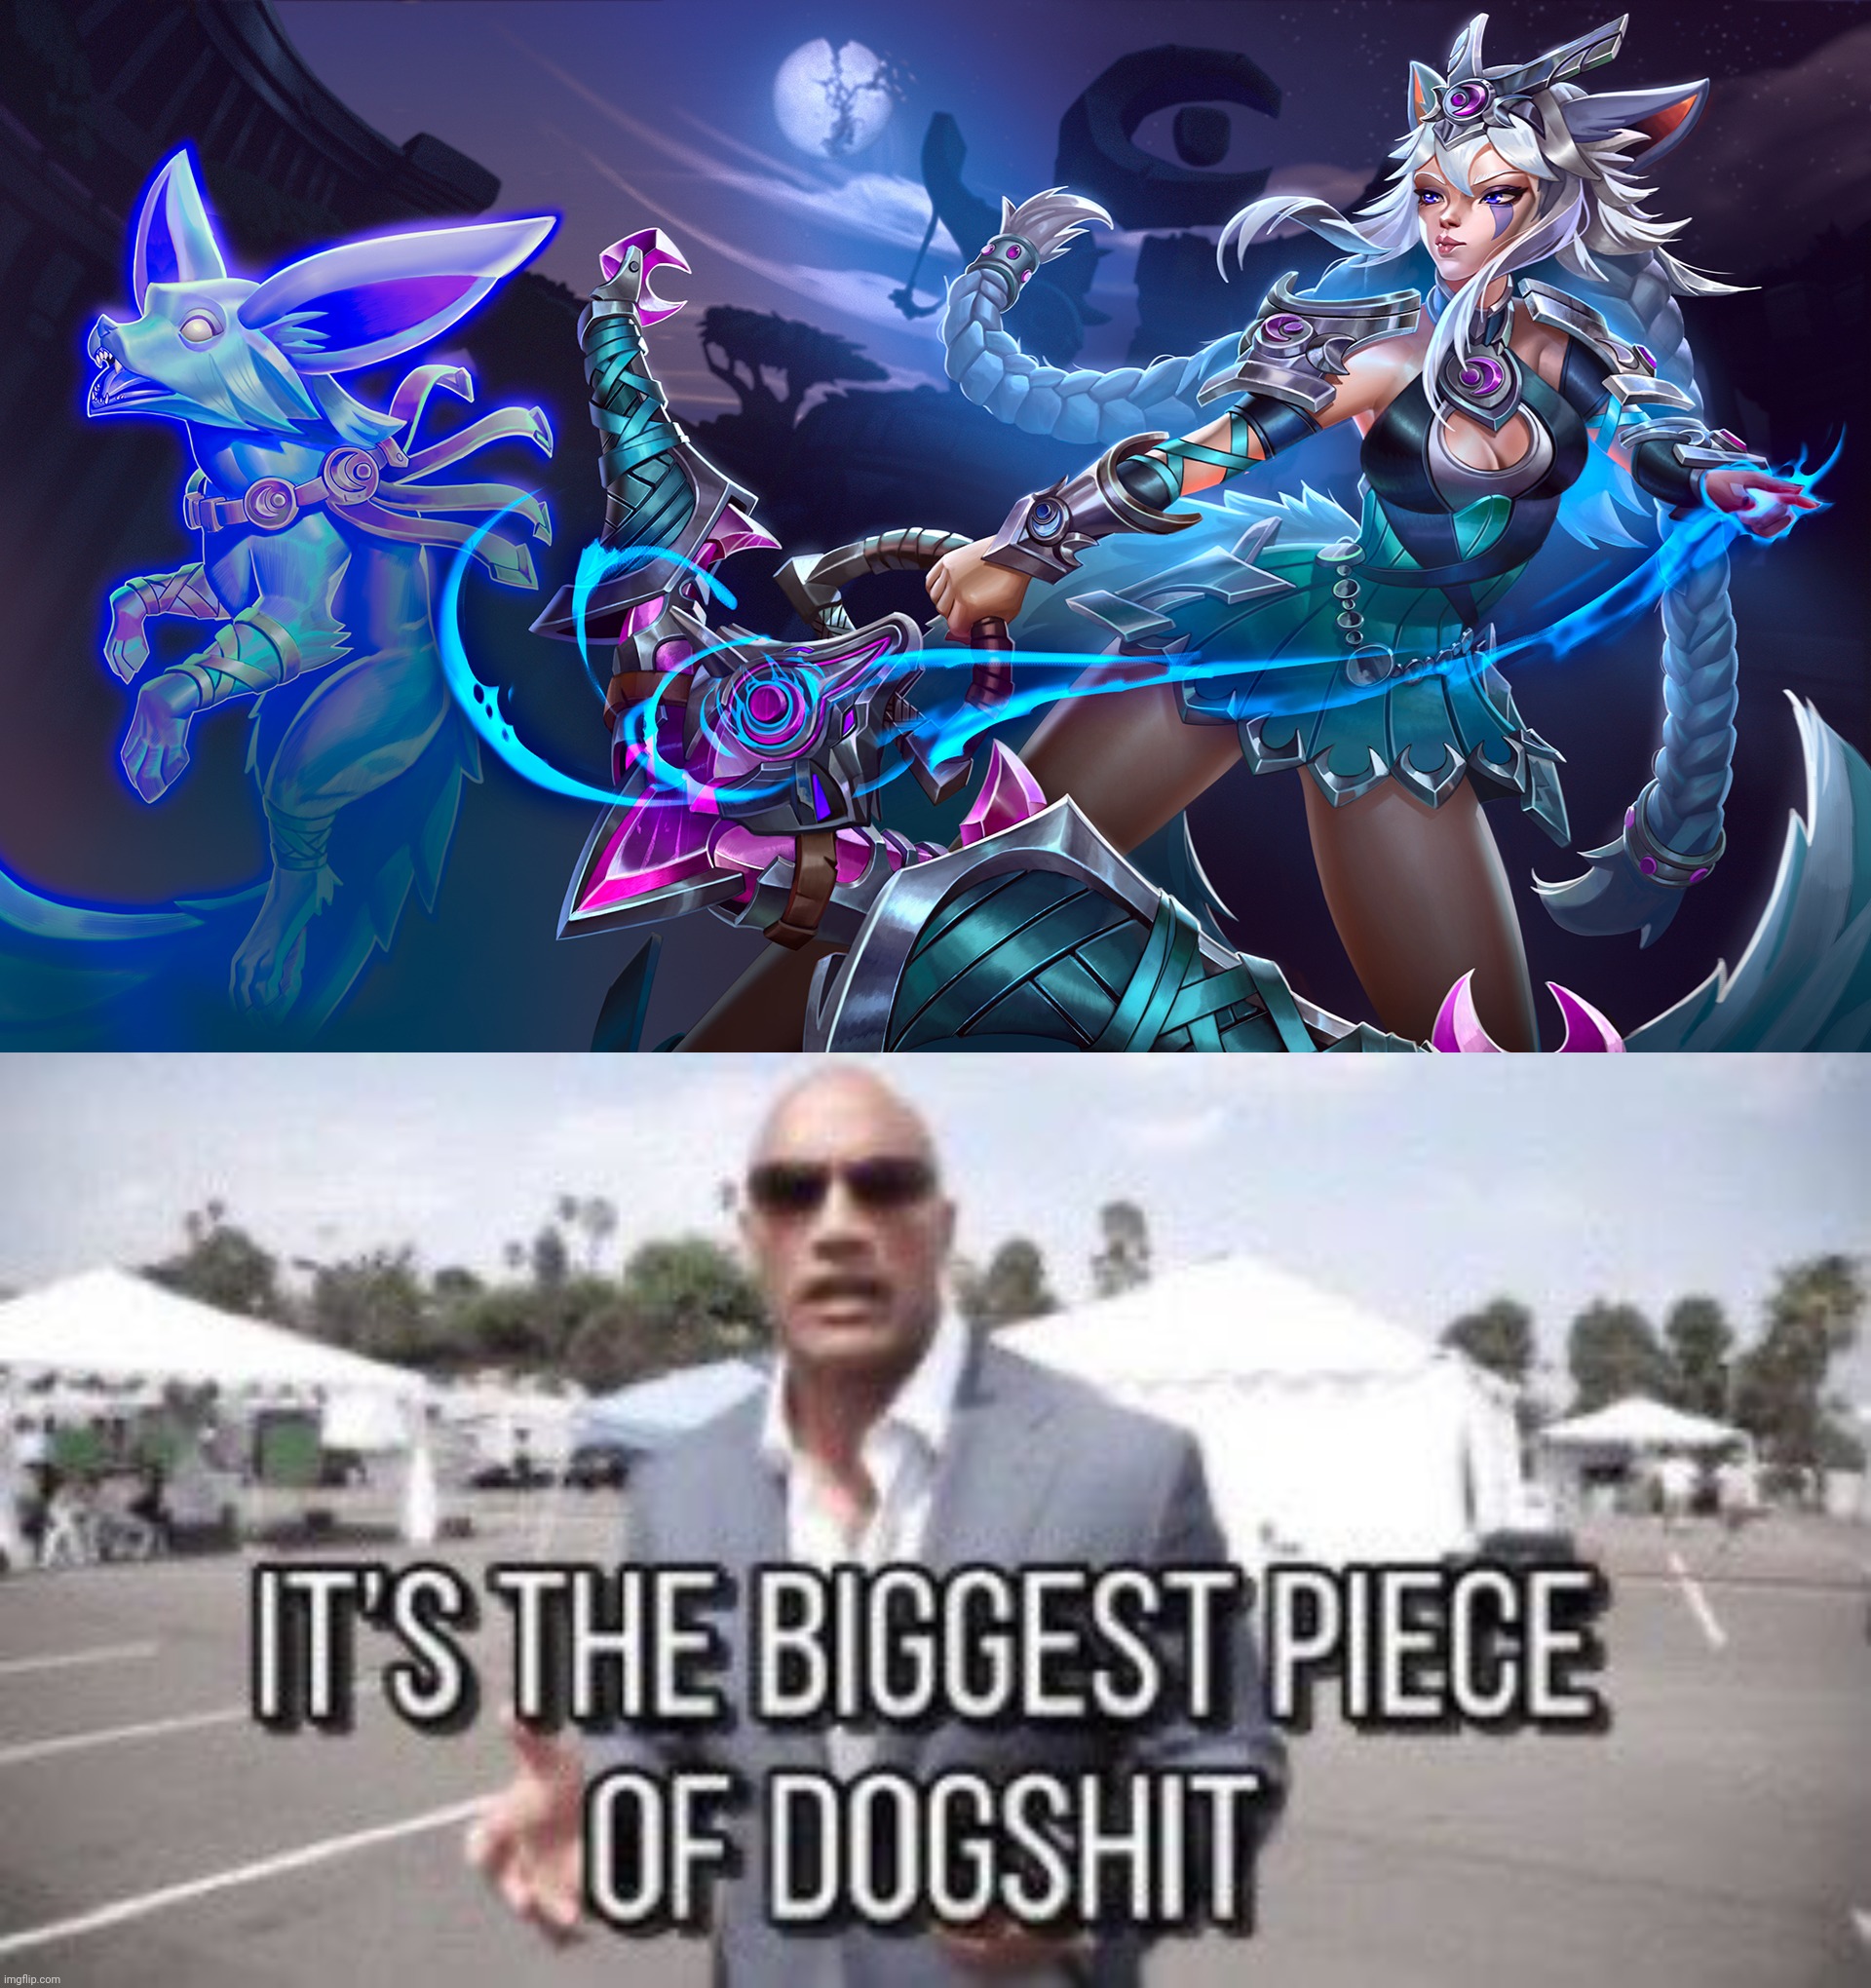 How do you mess up splash art this badly? (No offence to ThunderBrush, he probably knows how bad this is anyway) | image tagged in it's the biggest piece of dogshit,paladins,io,dogshit | made w/ Imgflip meme maker